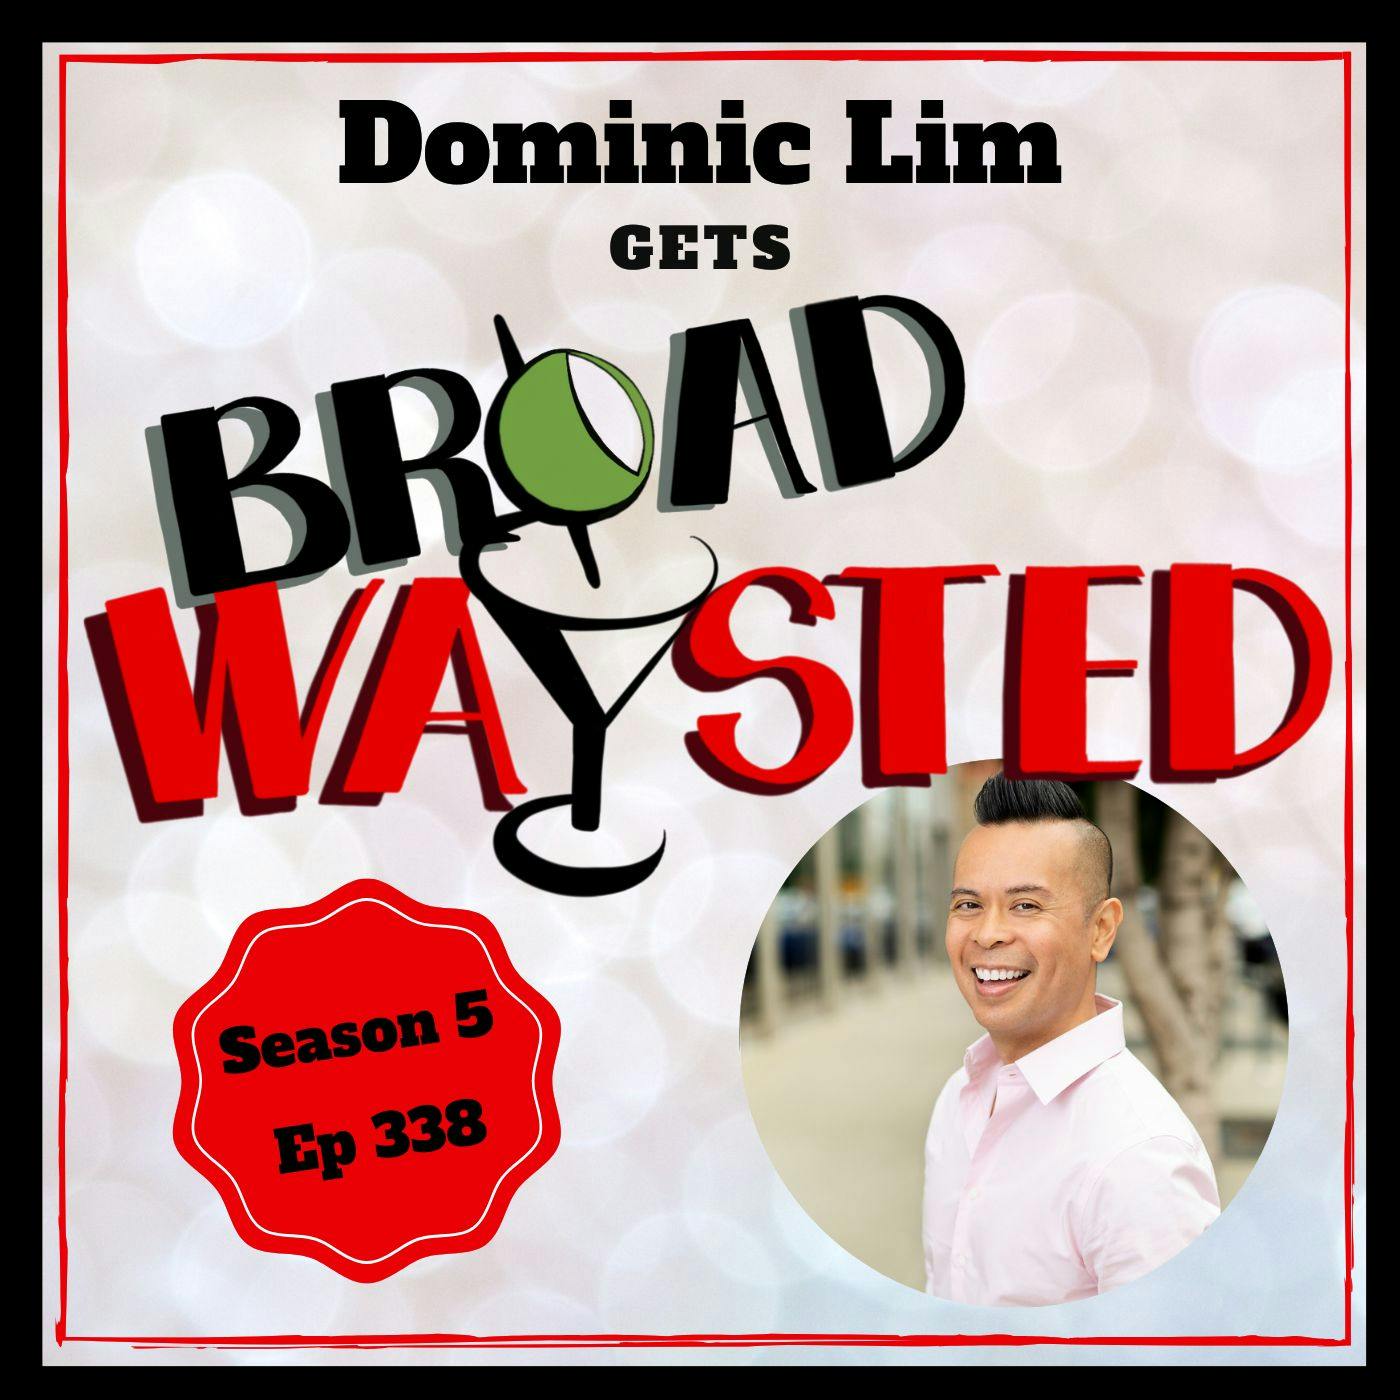 Episode 338: Dominic Lim gets Broadwaysted!